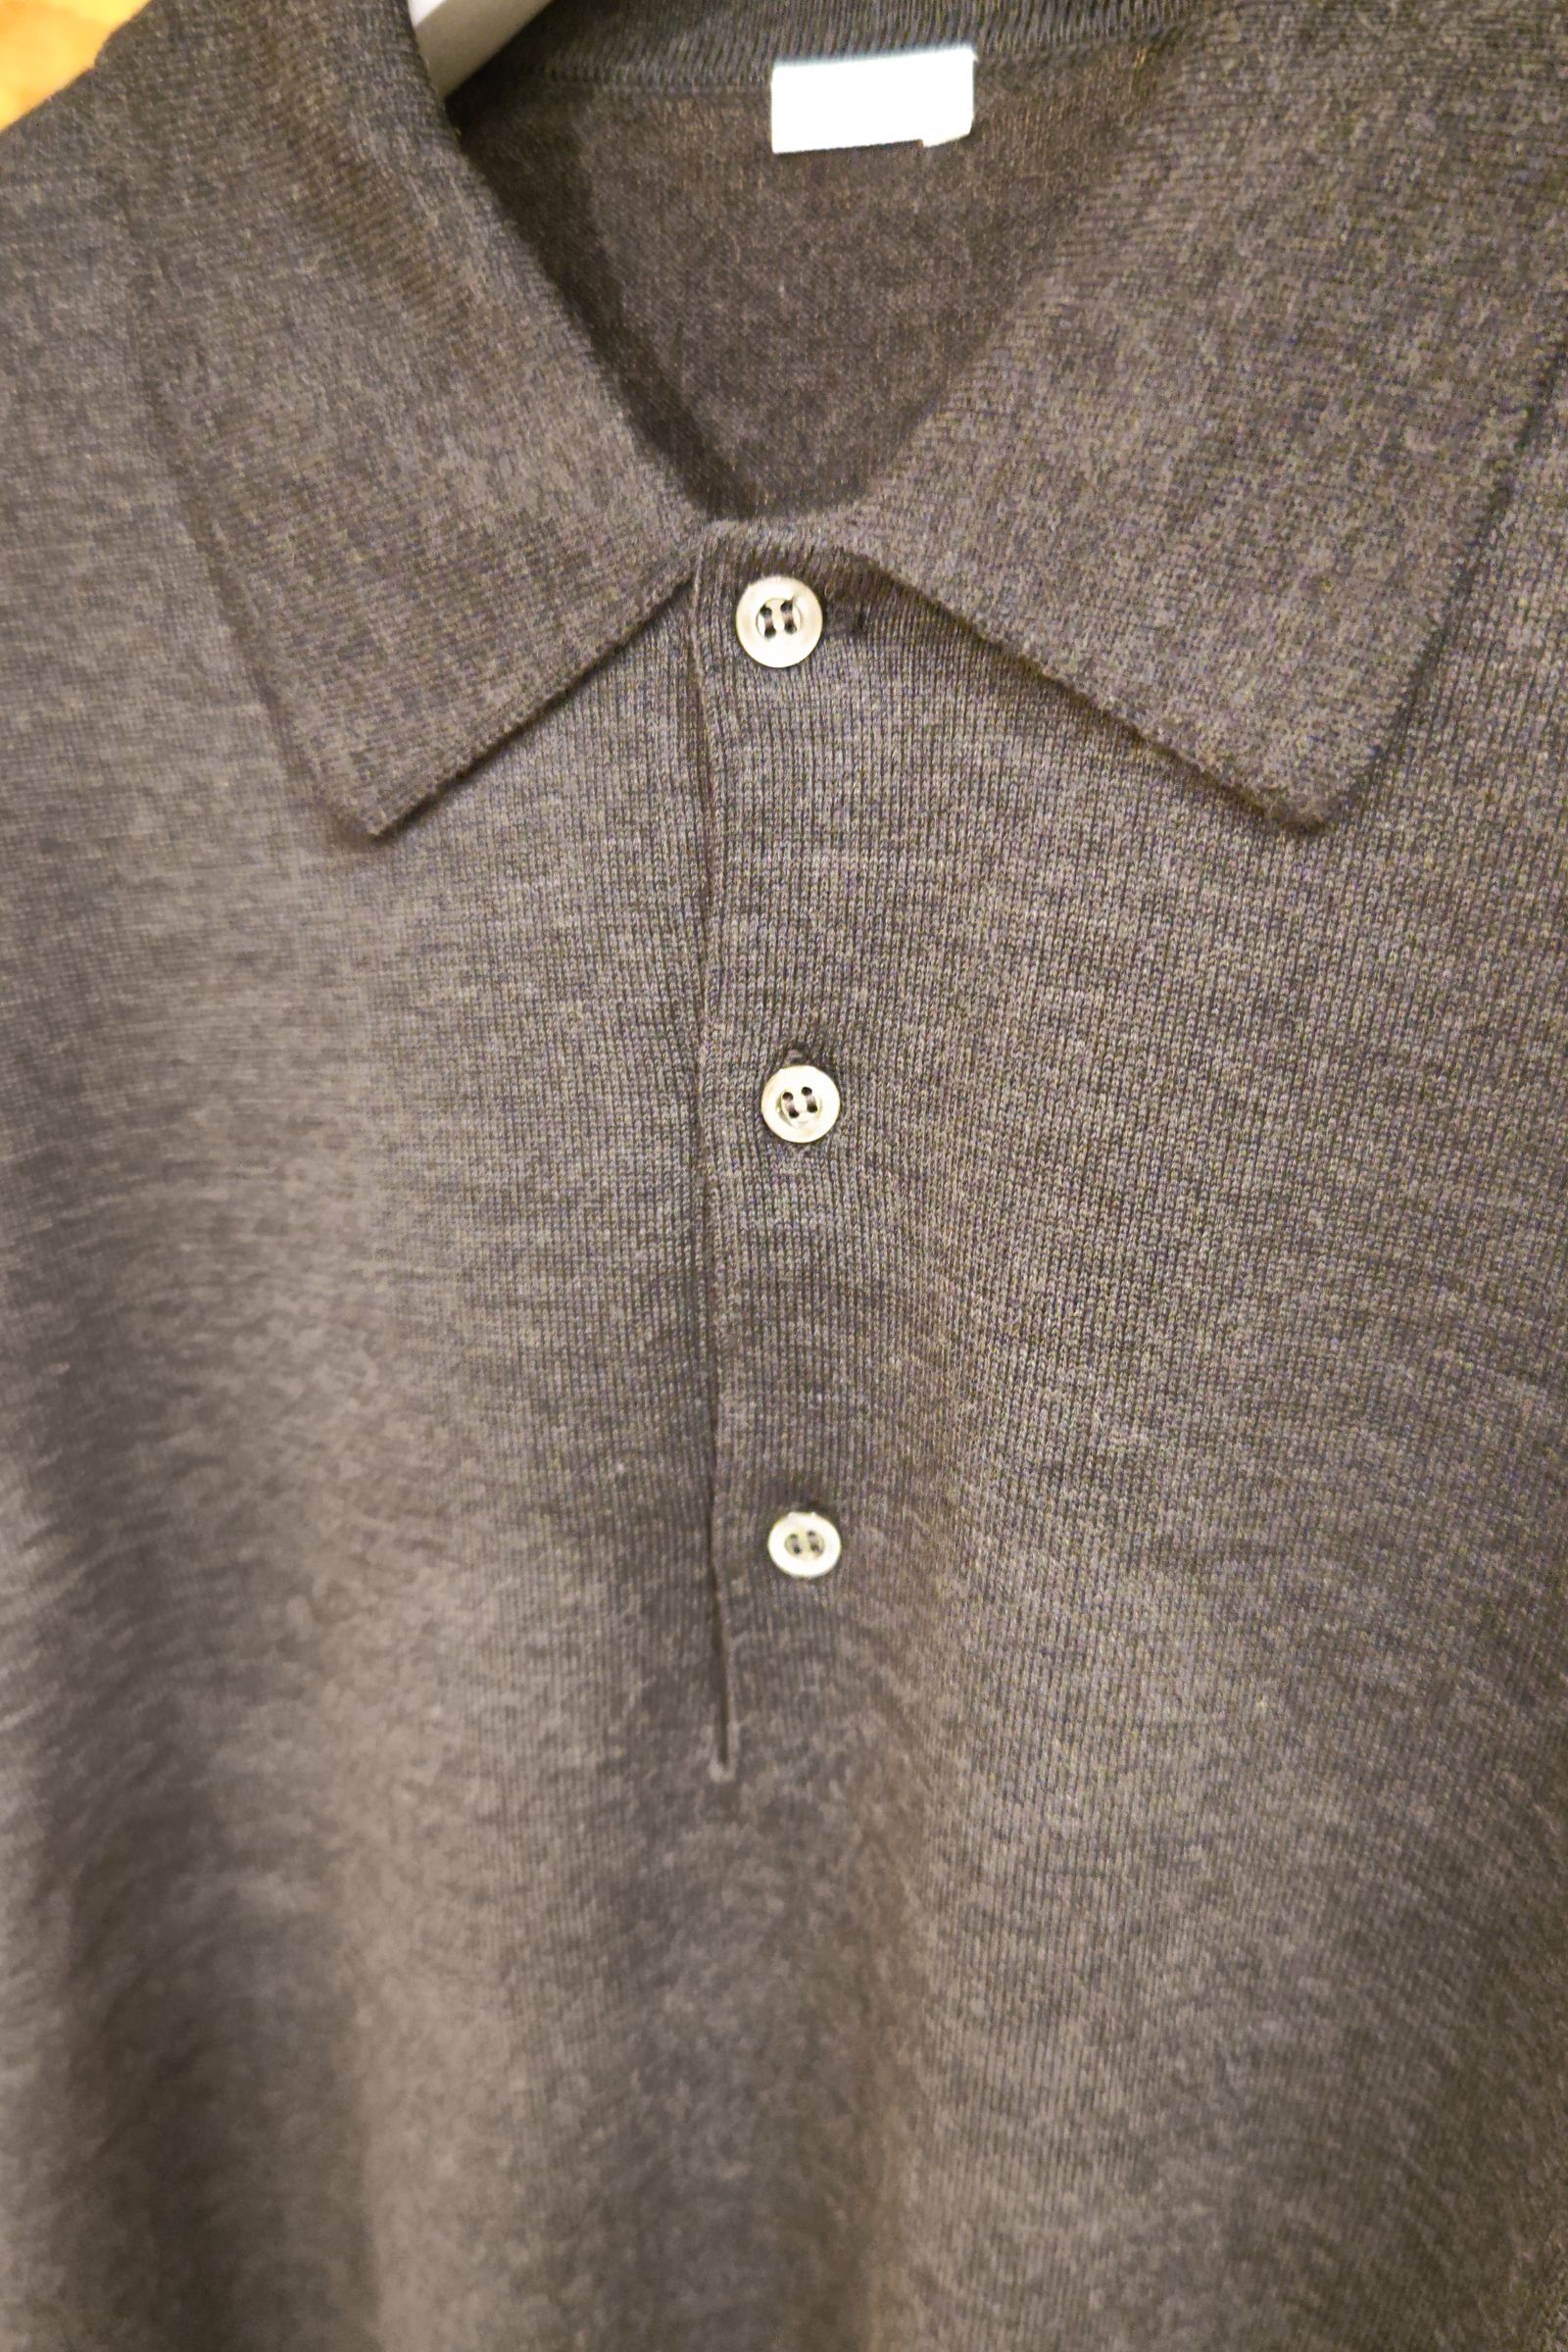 A.PRESSE   l/s knit polo shirts  charcoal  aw   asterisk